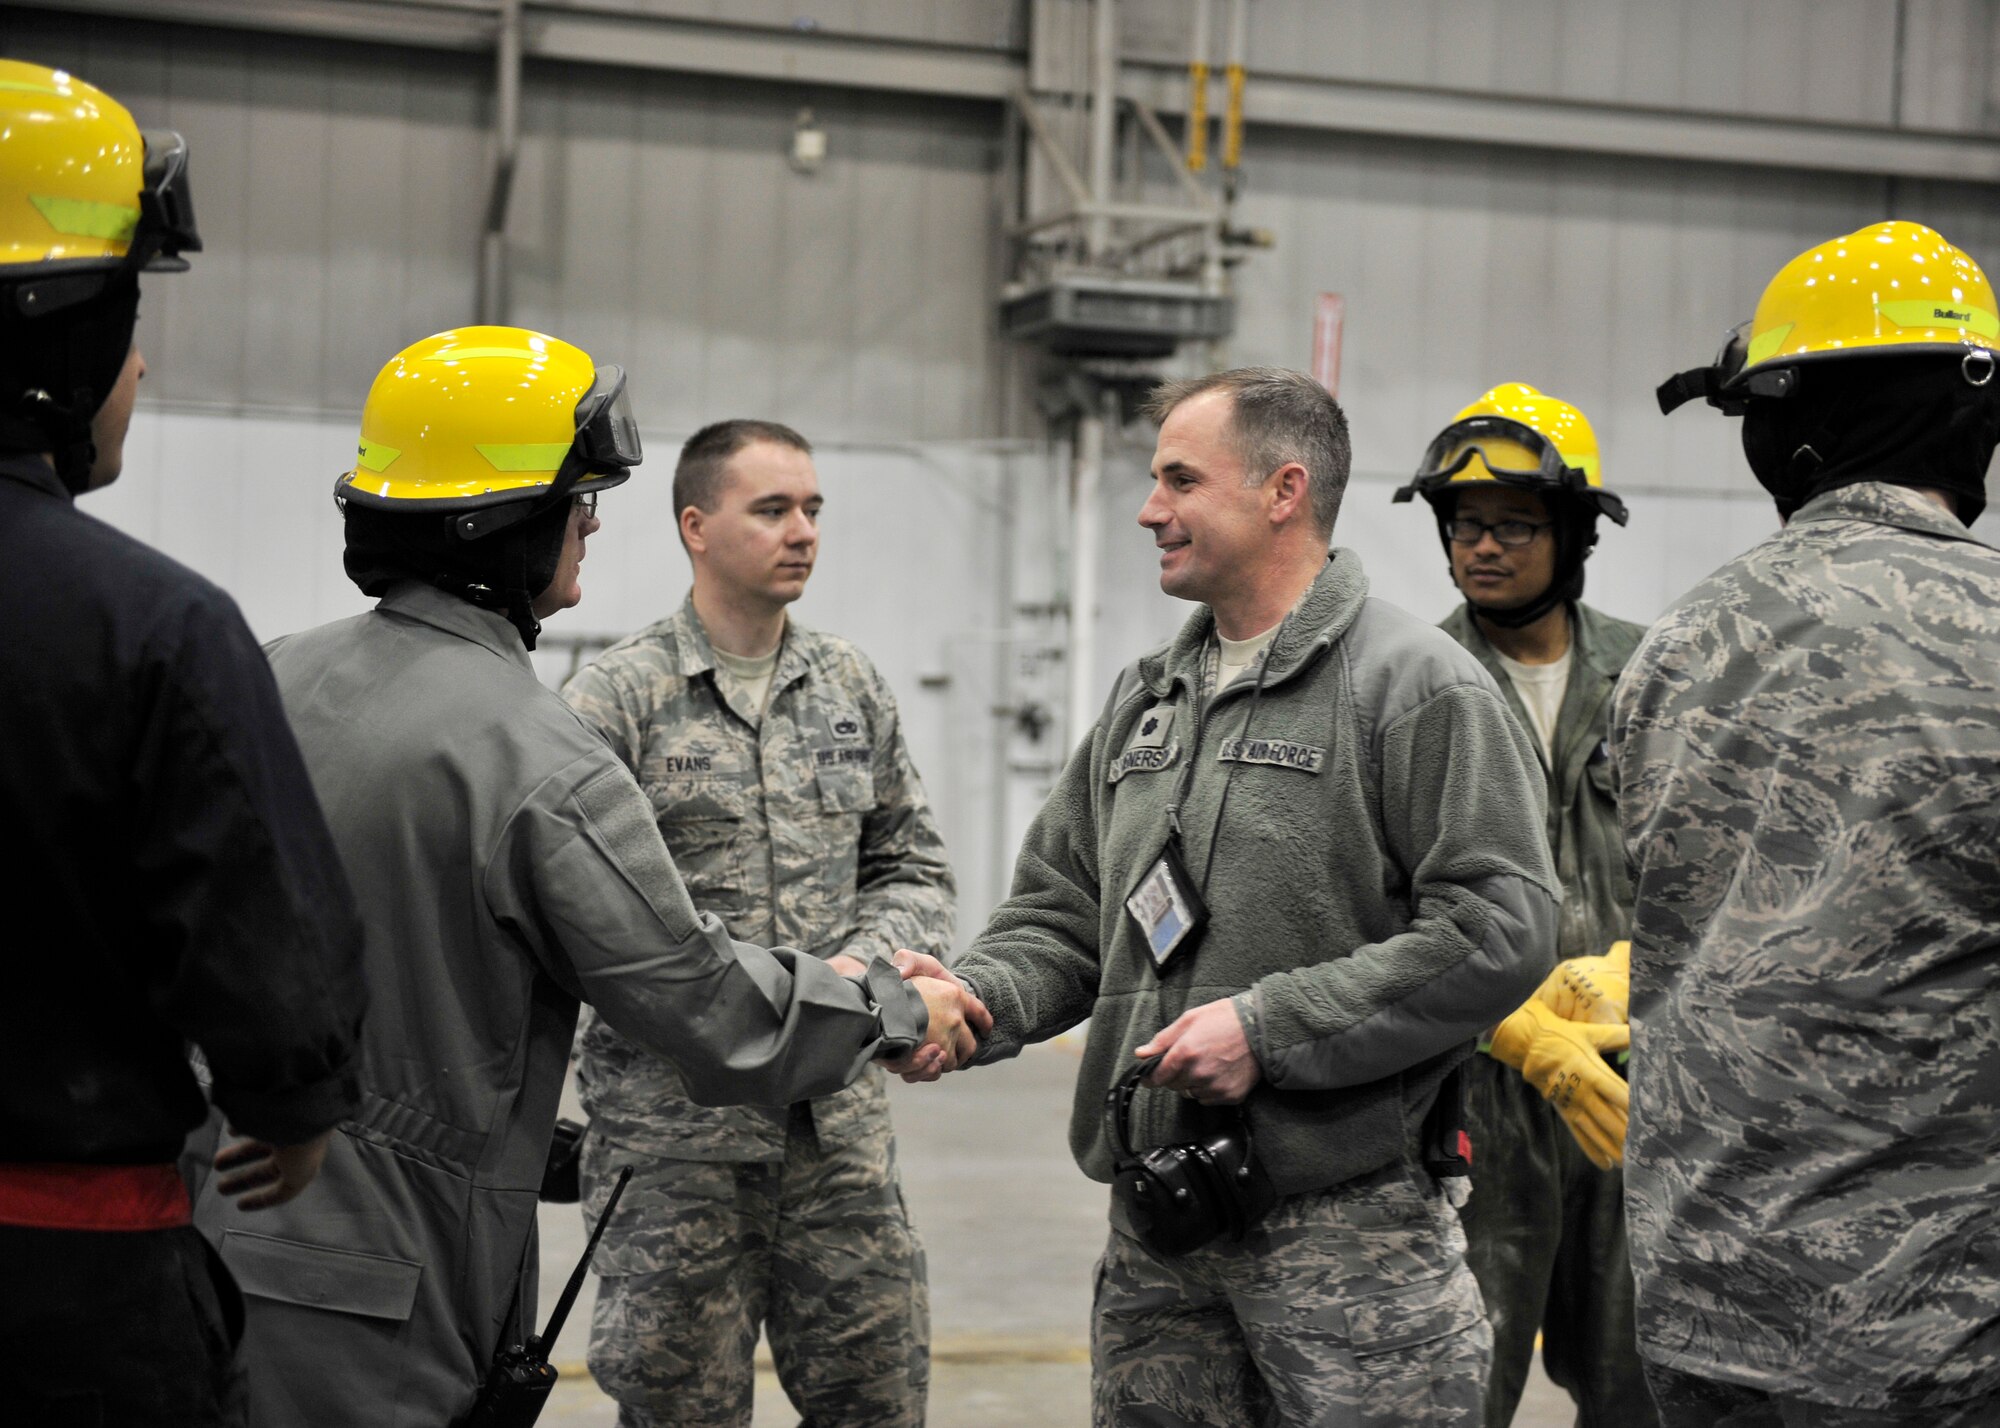 Lt. Col. Barton Kenerson, 354th Maintenance Group deputy commander, shakes hands with members from the crash recovery team April 23, 2014, Eielson Air Force Base, Alaska. Kenerson, along with other base officials, observed how the crew performed in simulating lifting an F-16 Fighting Falcon assigned to the 18th Aggressor Squadron for an operational readiness exercise. (U.S. Air Force photo by Senior Airman Ashley Nicole Taylor/Released)